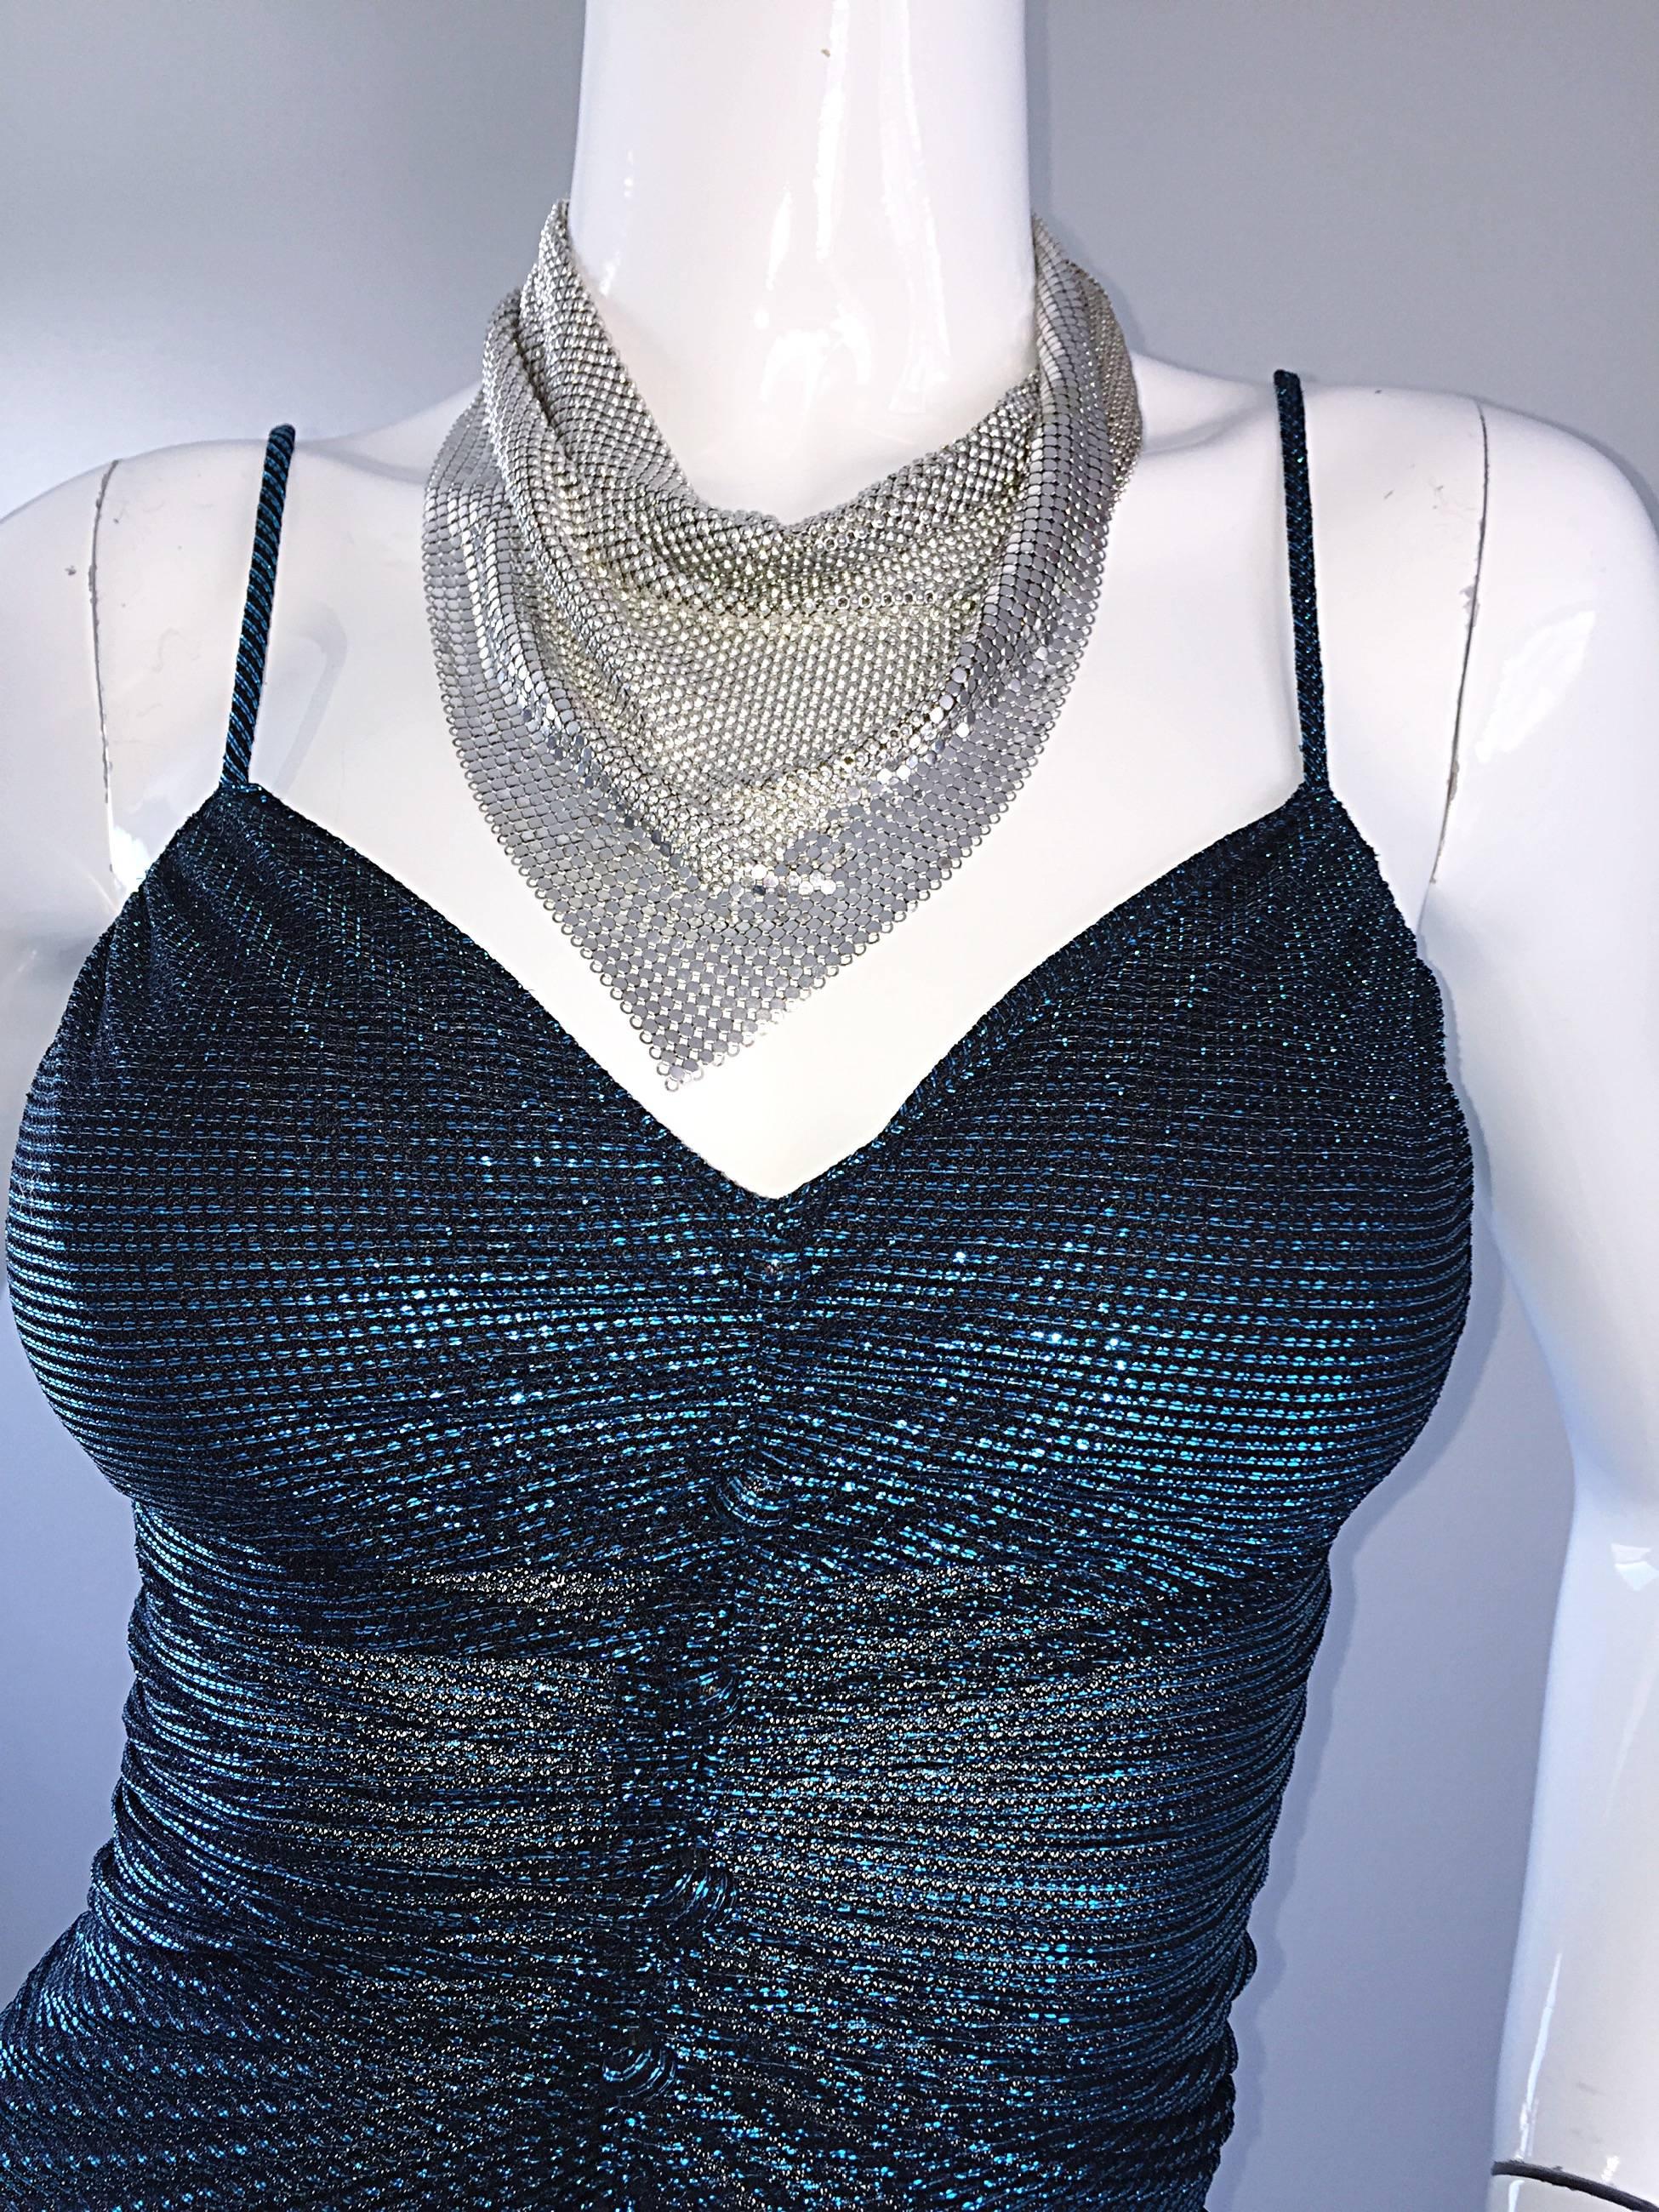 Retro Vintage Whiting and Davis 1970s Silver Chainmail 70s Metal Disco Bib Necklace 